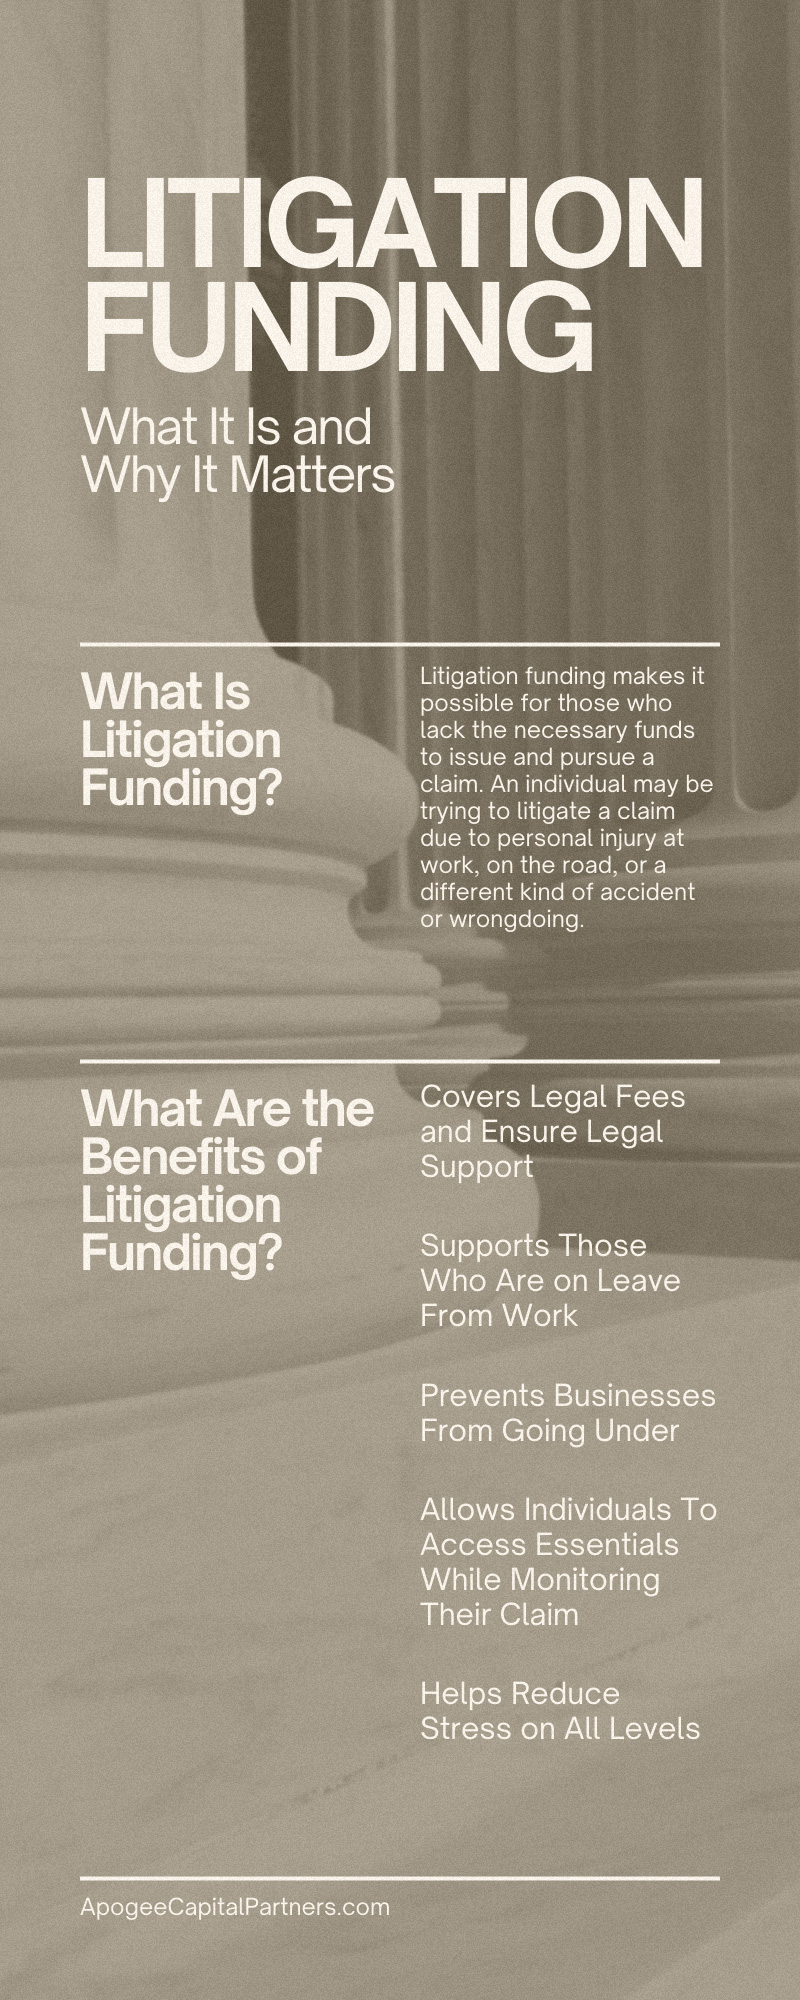 Litigation Funding: What It Is and Why It Matters